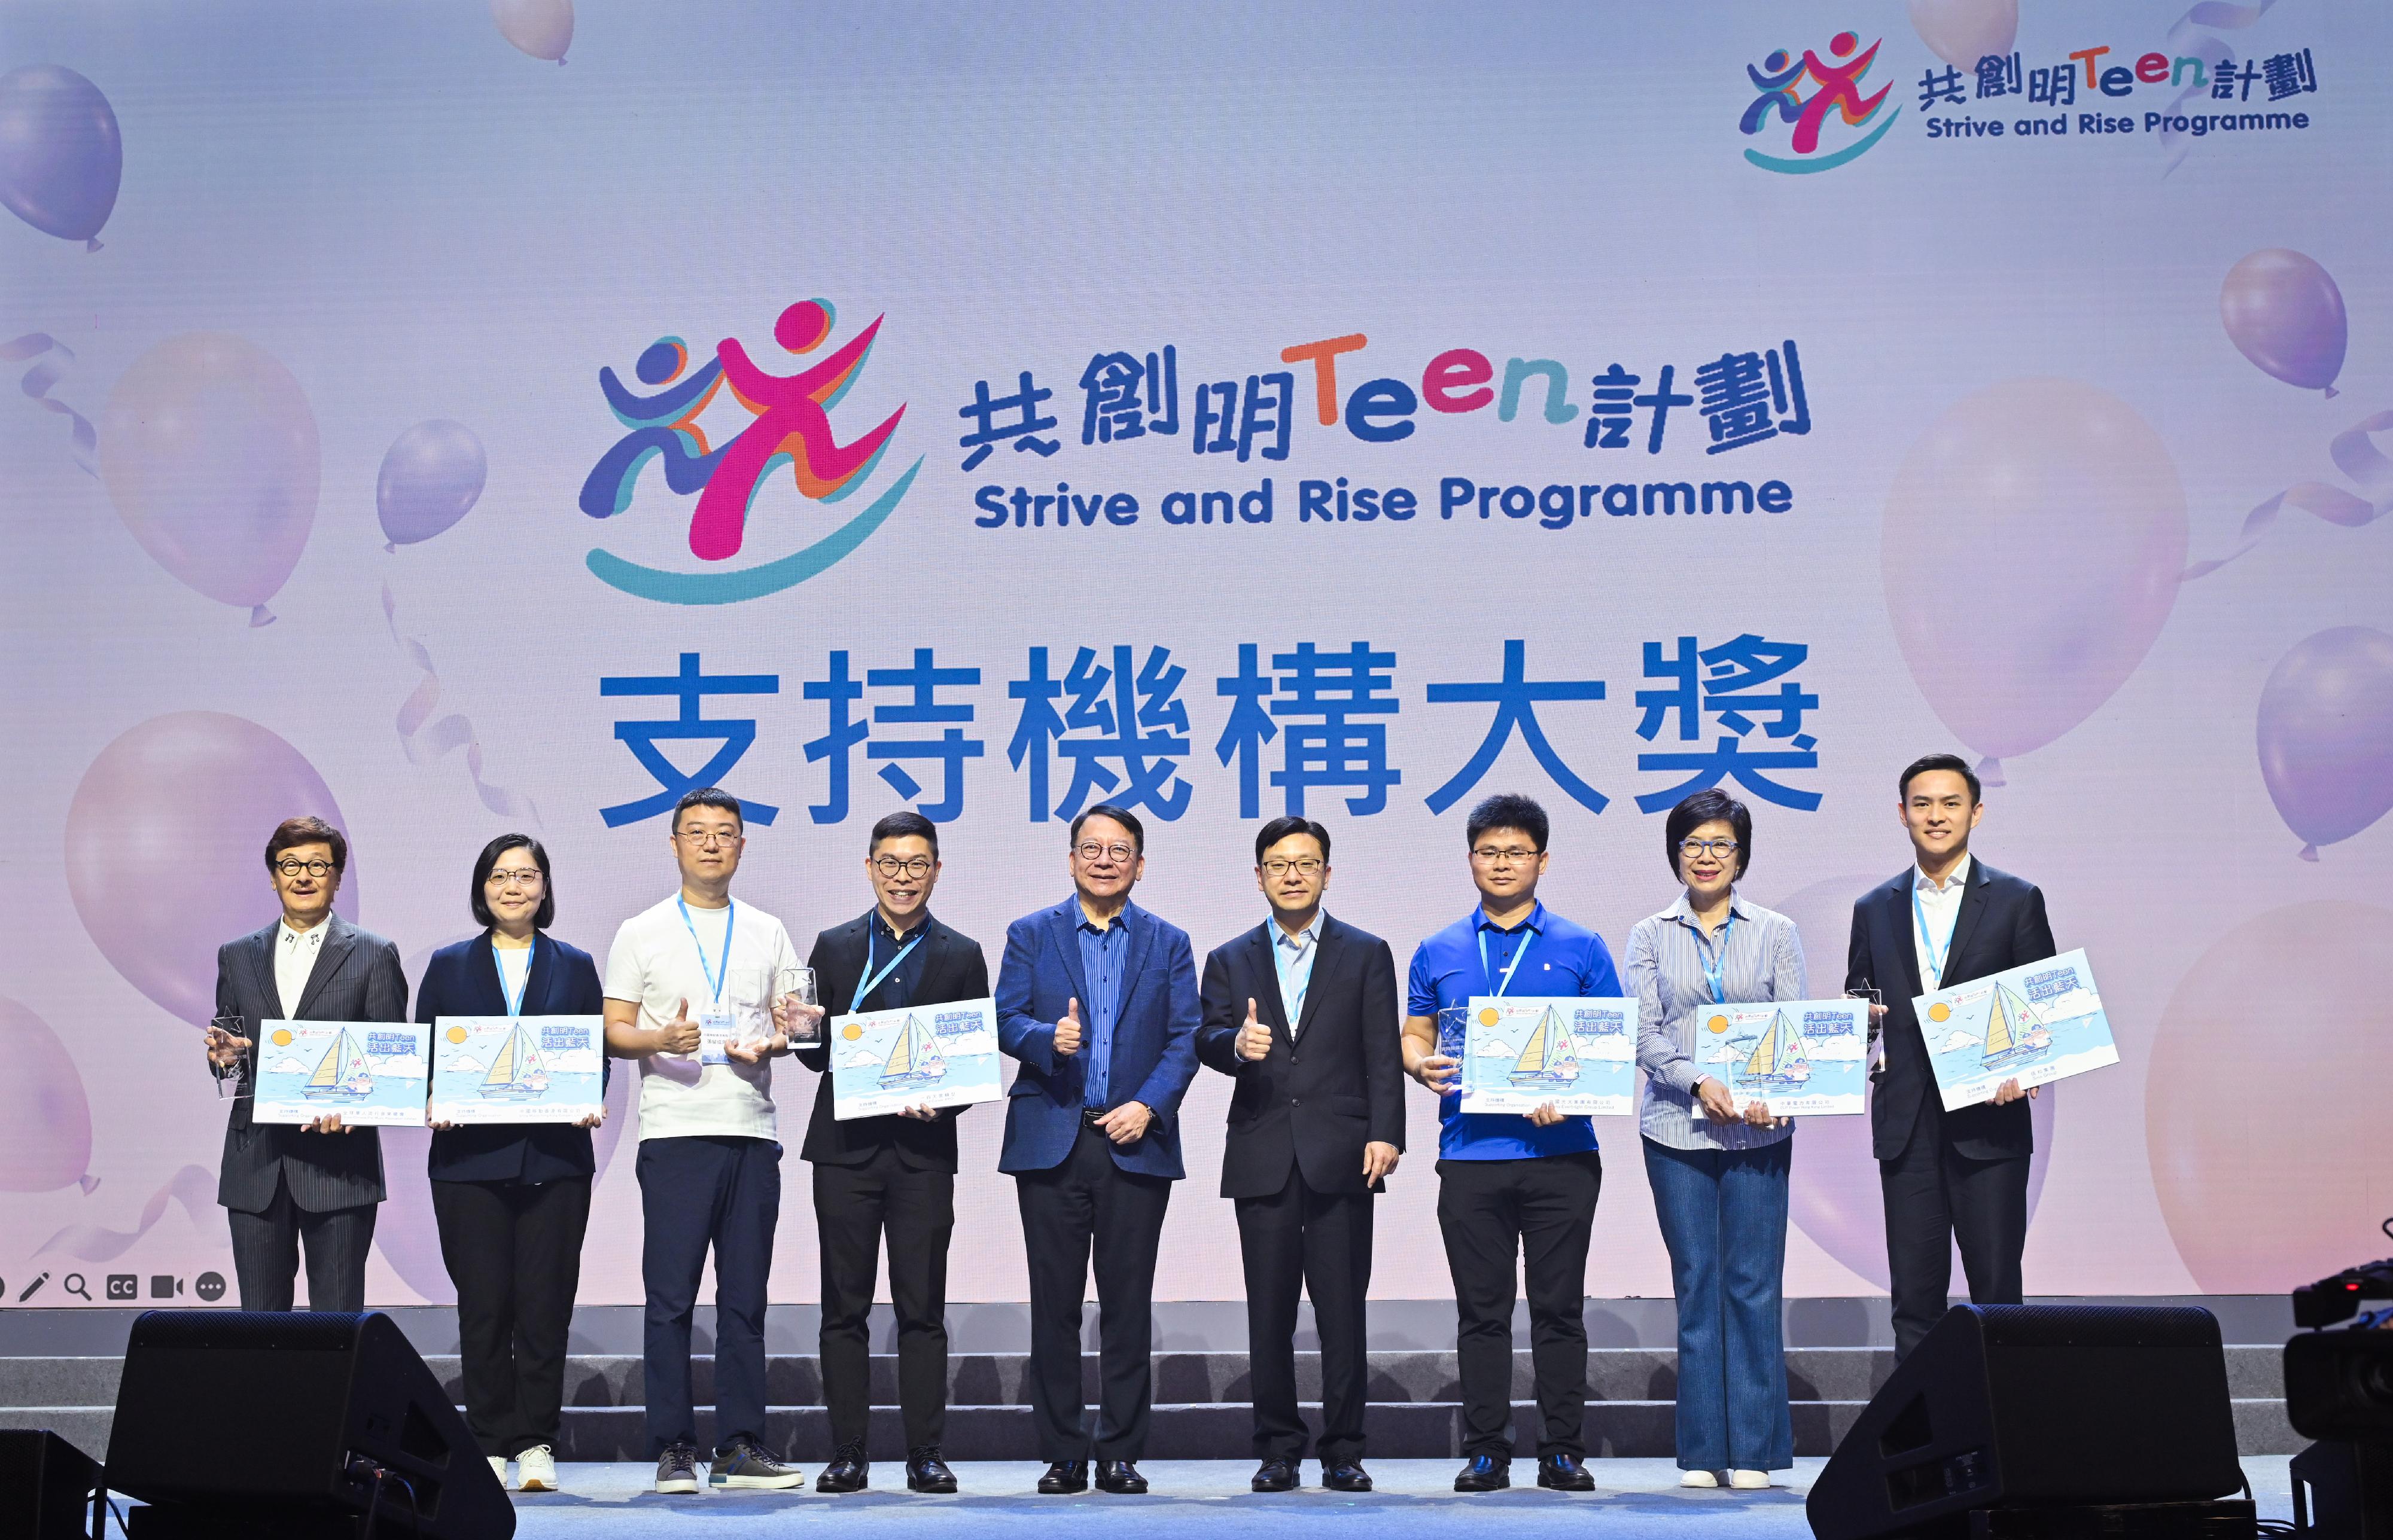 The Chief Secretary for Administration, Mr Chan Kwok-ki, attended the Graduation Ceremony of the Strive and Rise Programme today (November 4). Photo shows Mr Chan (centre) and the Secretary for Labour and Welfare, Mr Chris Sun (fourth right), with representatives of supporting organisations.
